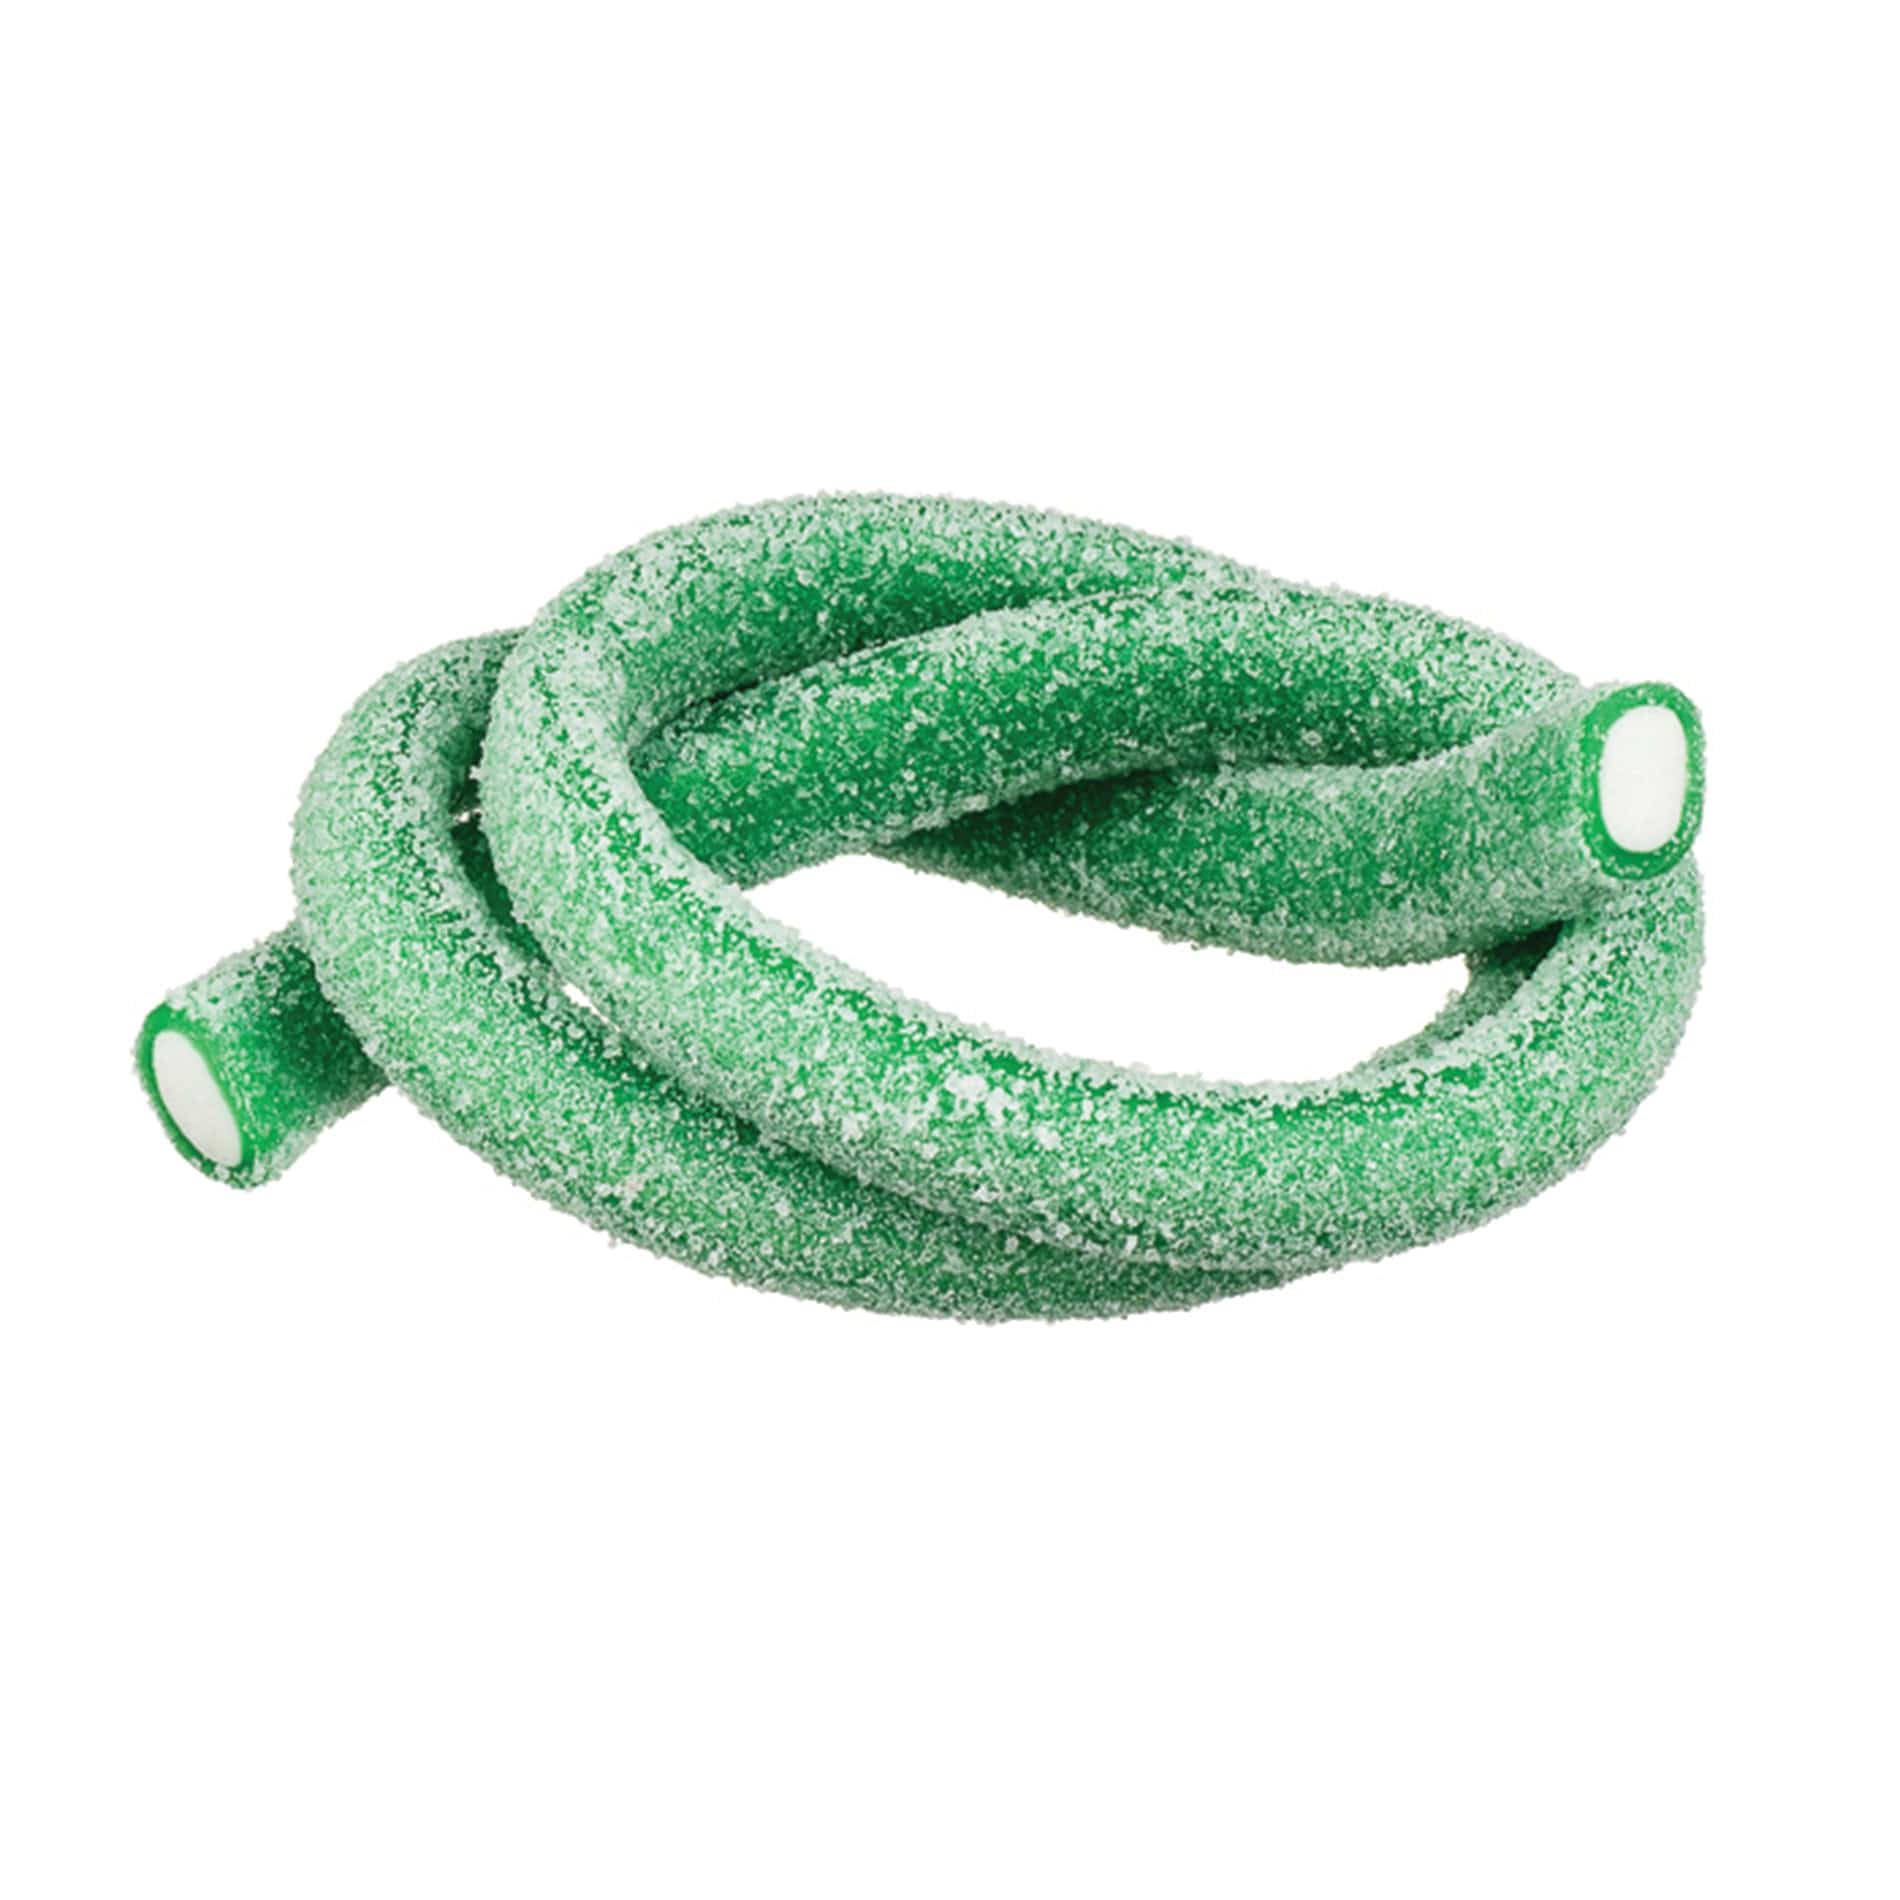 Meeega Cables Gummy Rope SOUR APPLE Copy of Meeega Cables European Chewy Rope Candy - Custom 12-Pack individually wrapped Meeega Cables, each over 2-feet long cups with lids and straws